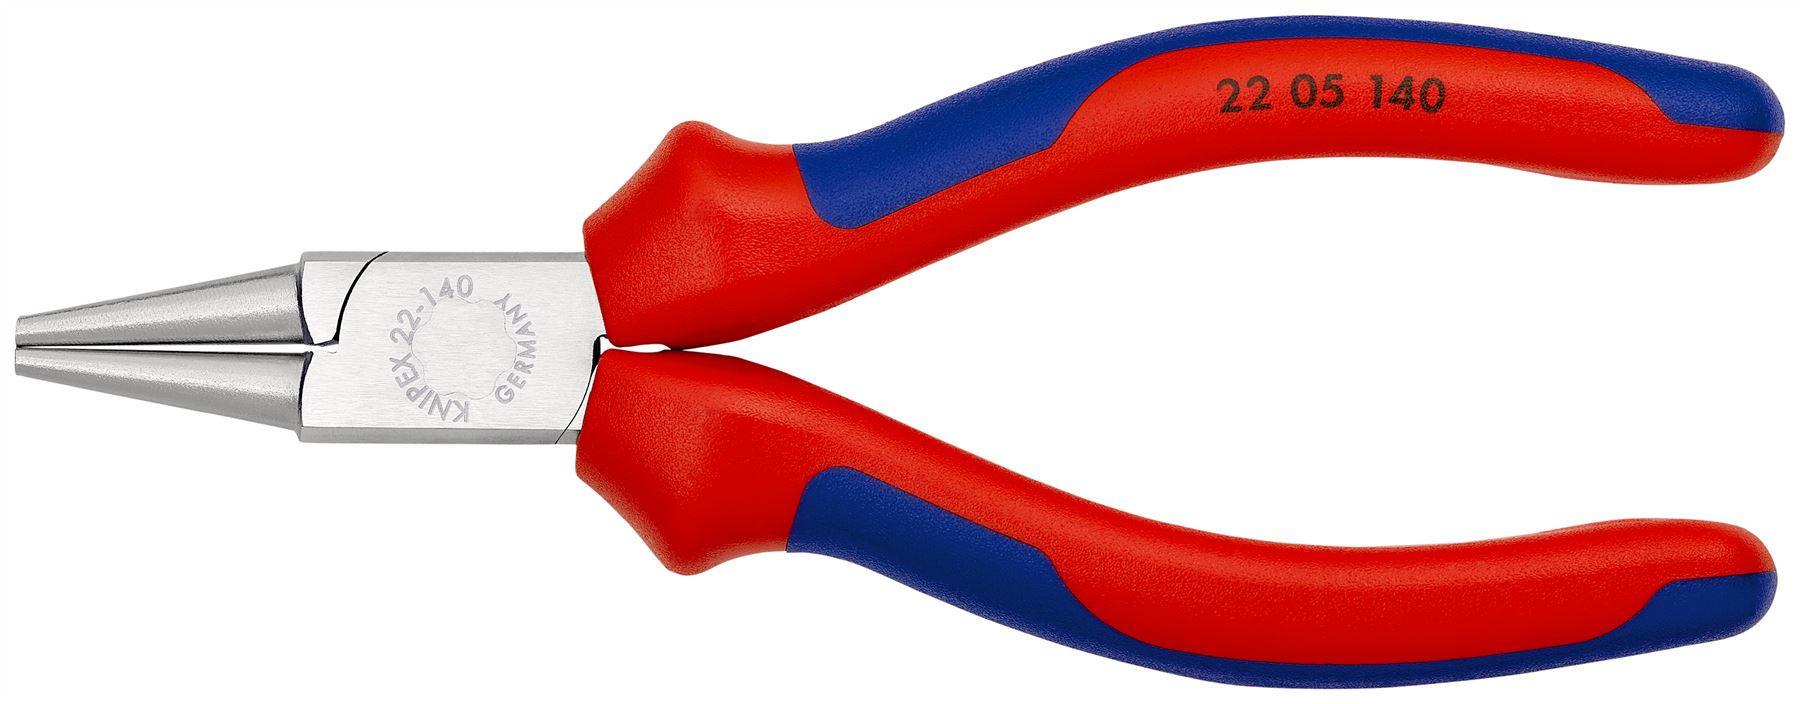 Knipex Round Nose Pliers 140mm Multi Component Grips 22 05 140